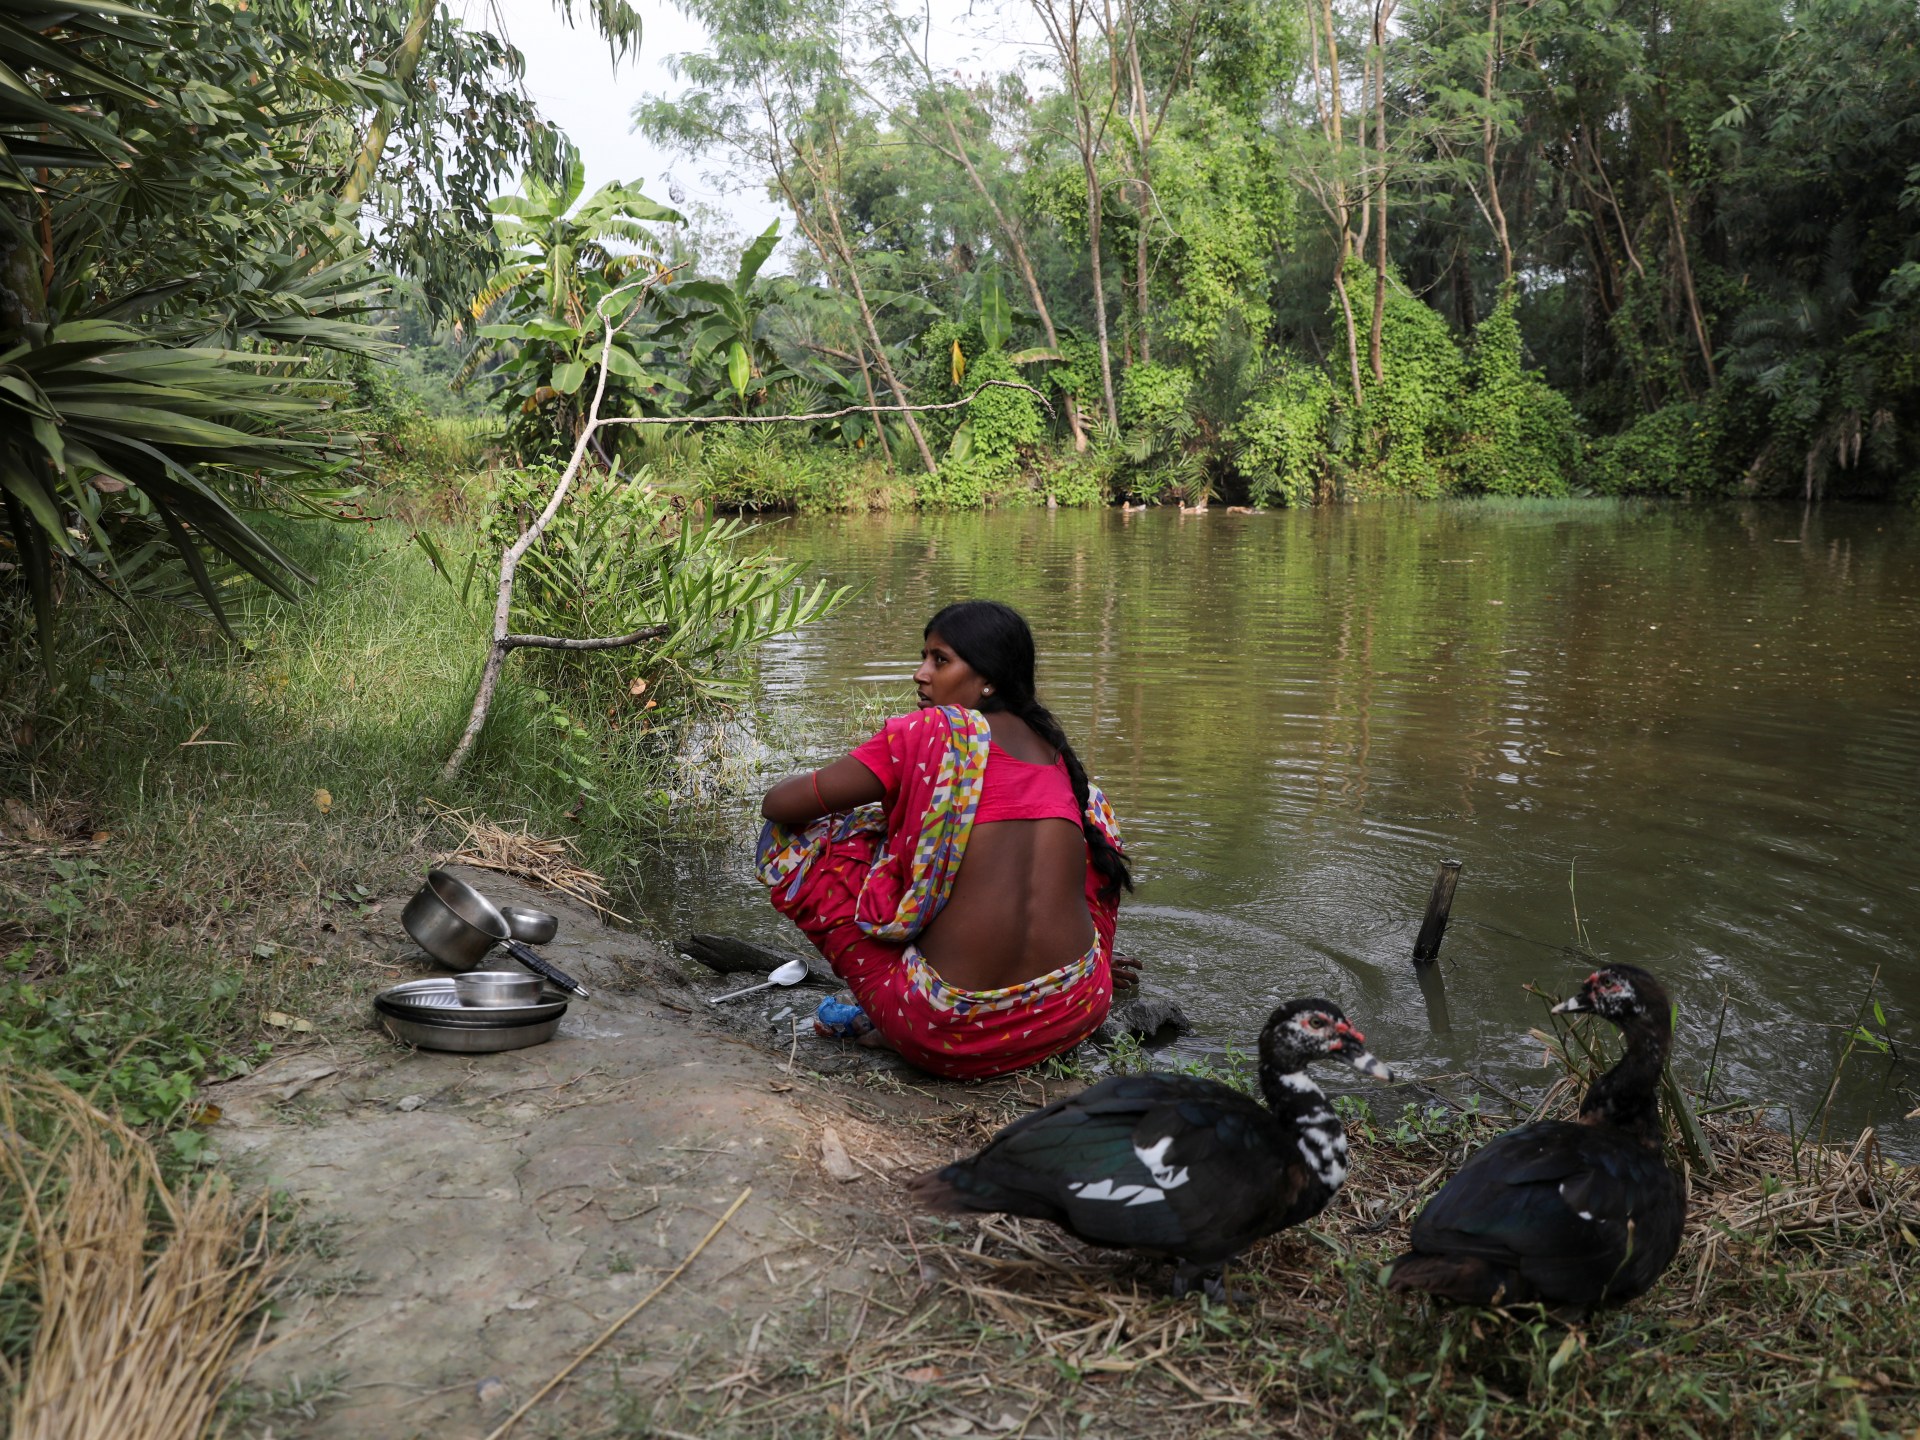 The Sundarbans dilemma: Islands swallowed by water, and nowhere else to go | Climate Crisis